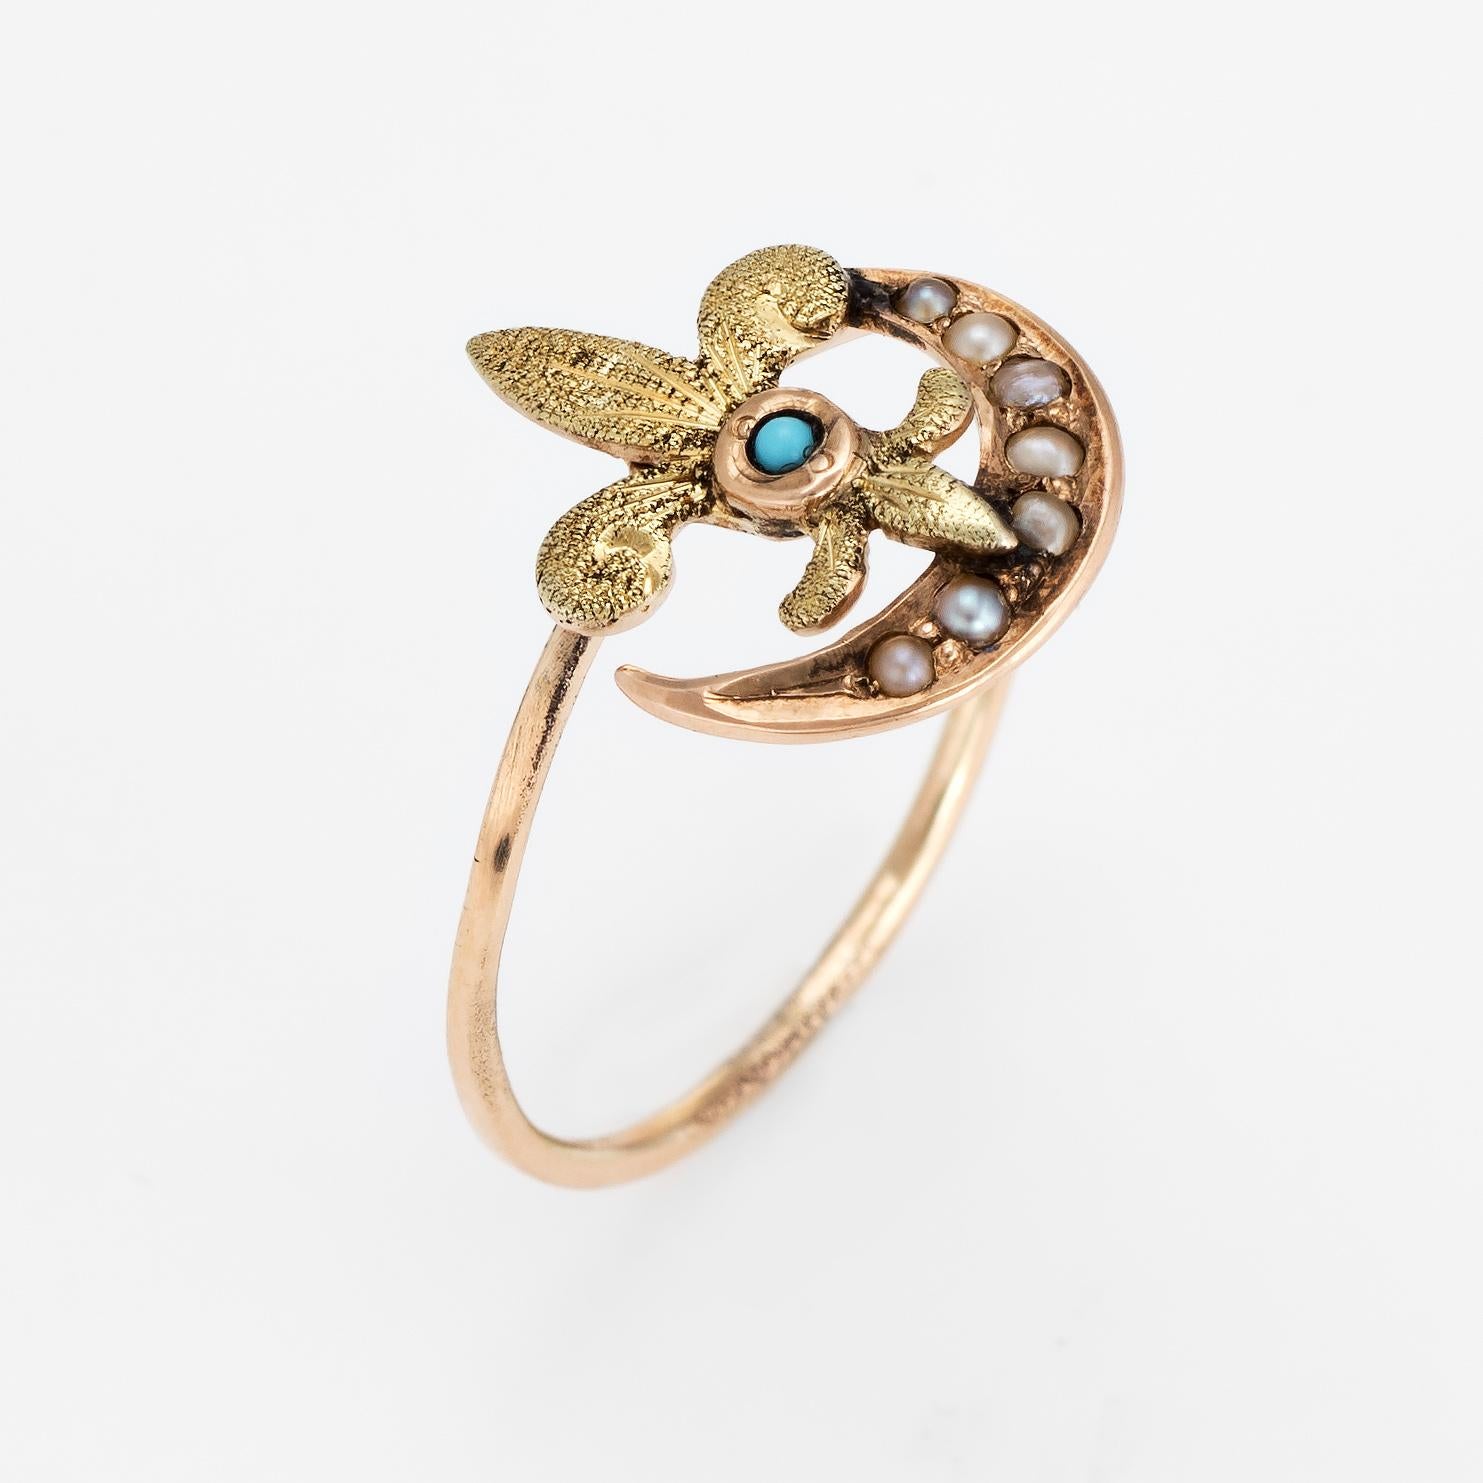 Originally an antique Victorian era stick pin (circa 1880s to 1900s), the fleur de lis & crescent moon ring is crafted in 14 karat yellow gold. 

The ring is mounted with the original stick pin. Our jeweler rounded the stick pin into a slim band for